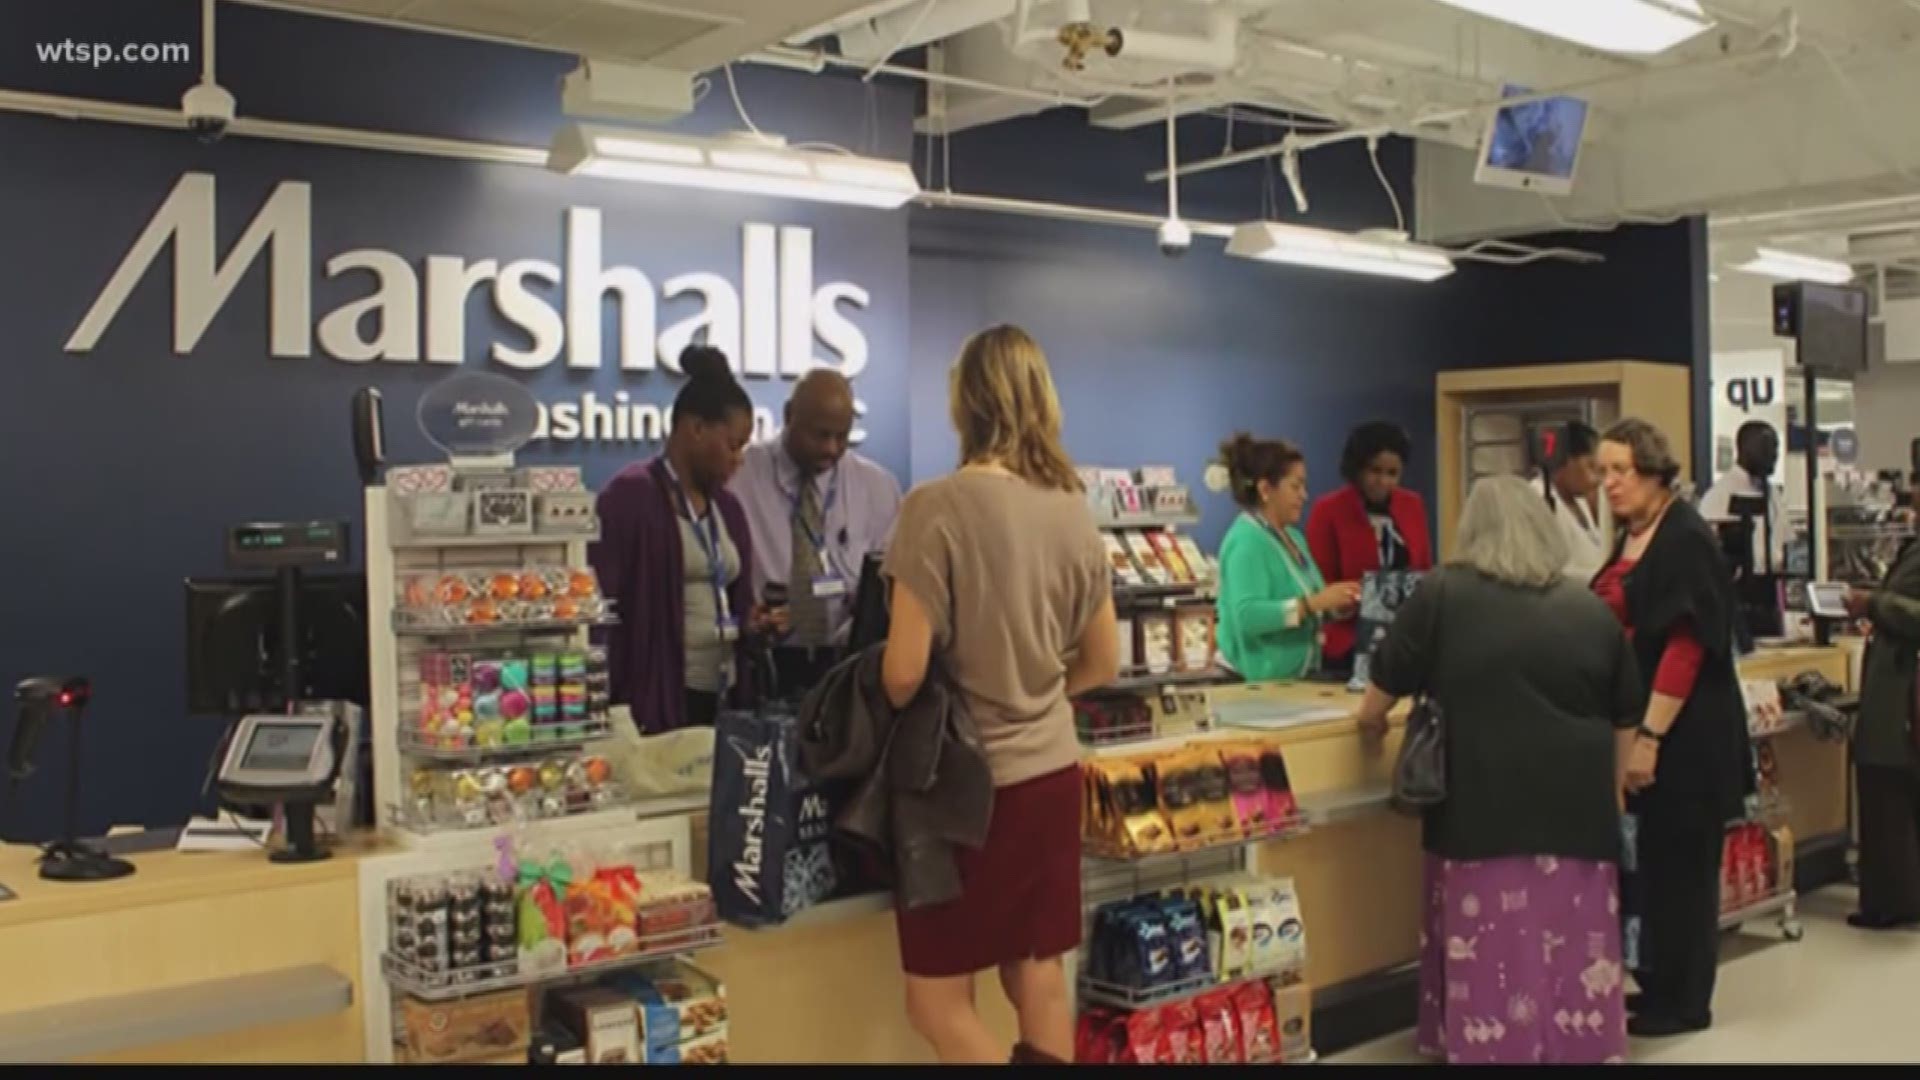 Marshalls' parent company says it will offer different merchandise online than in store.